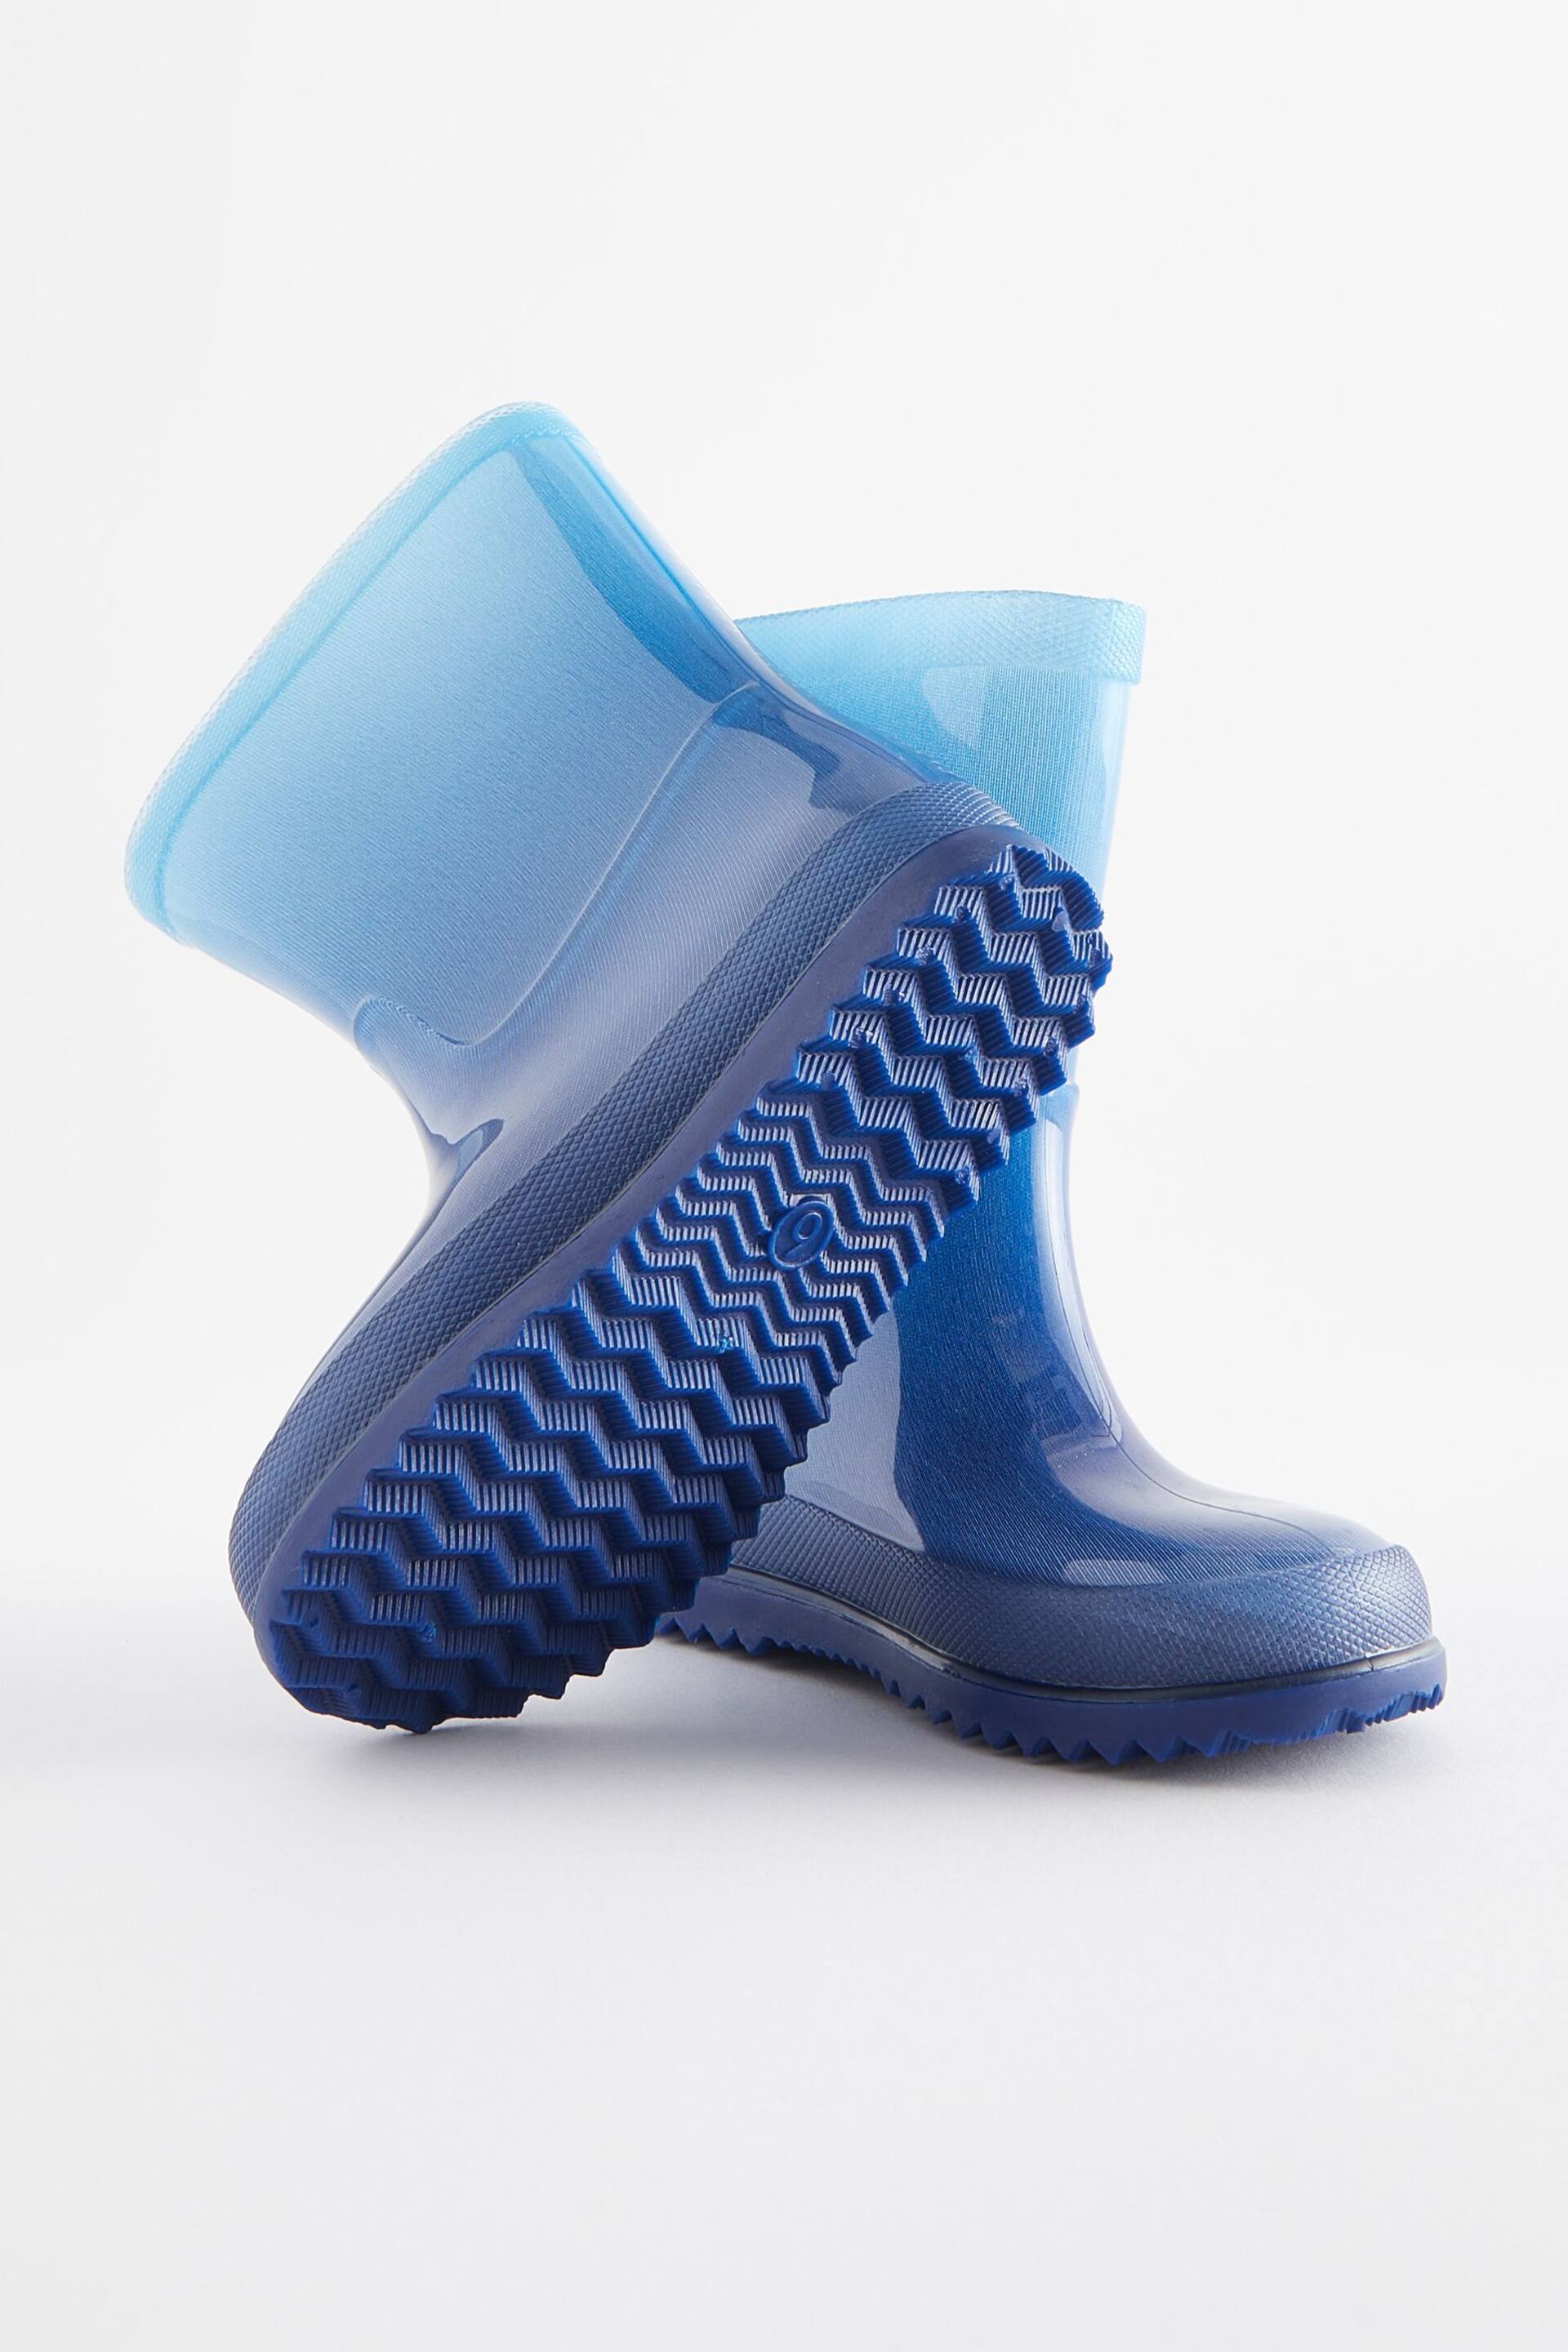 Blue Wellies - Image 4 of 4